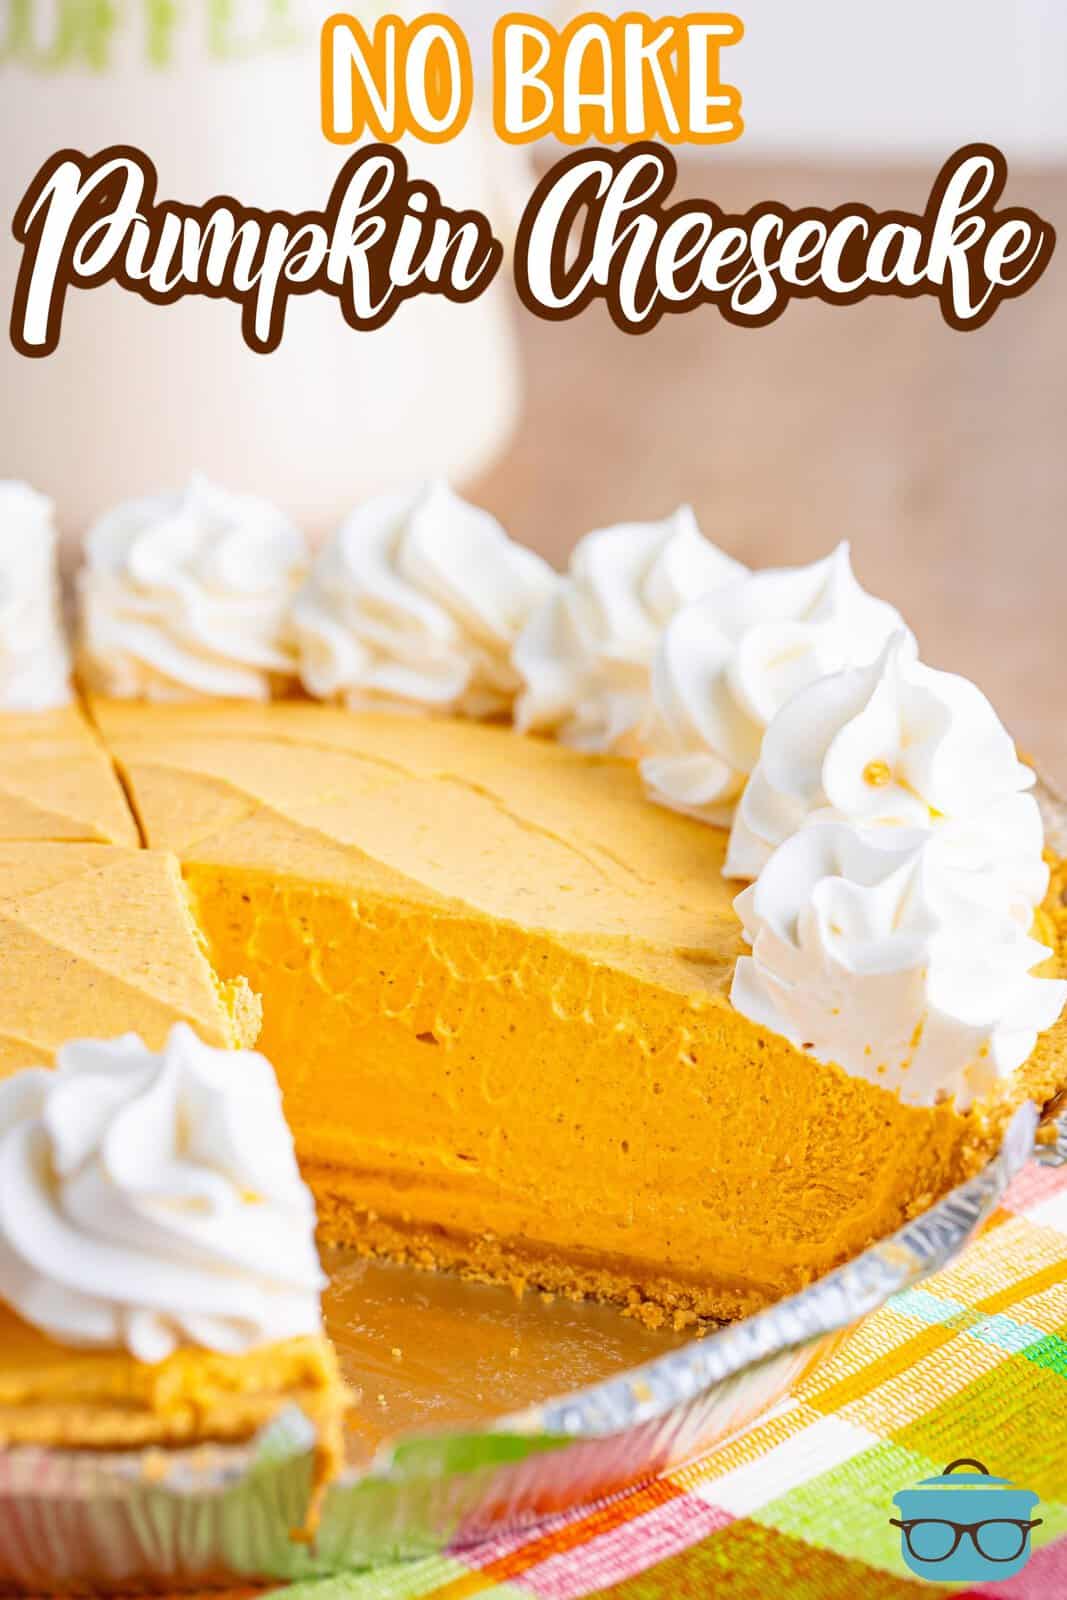 A No Bake Pumpkin Cheesecake with a slice missing.